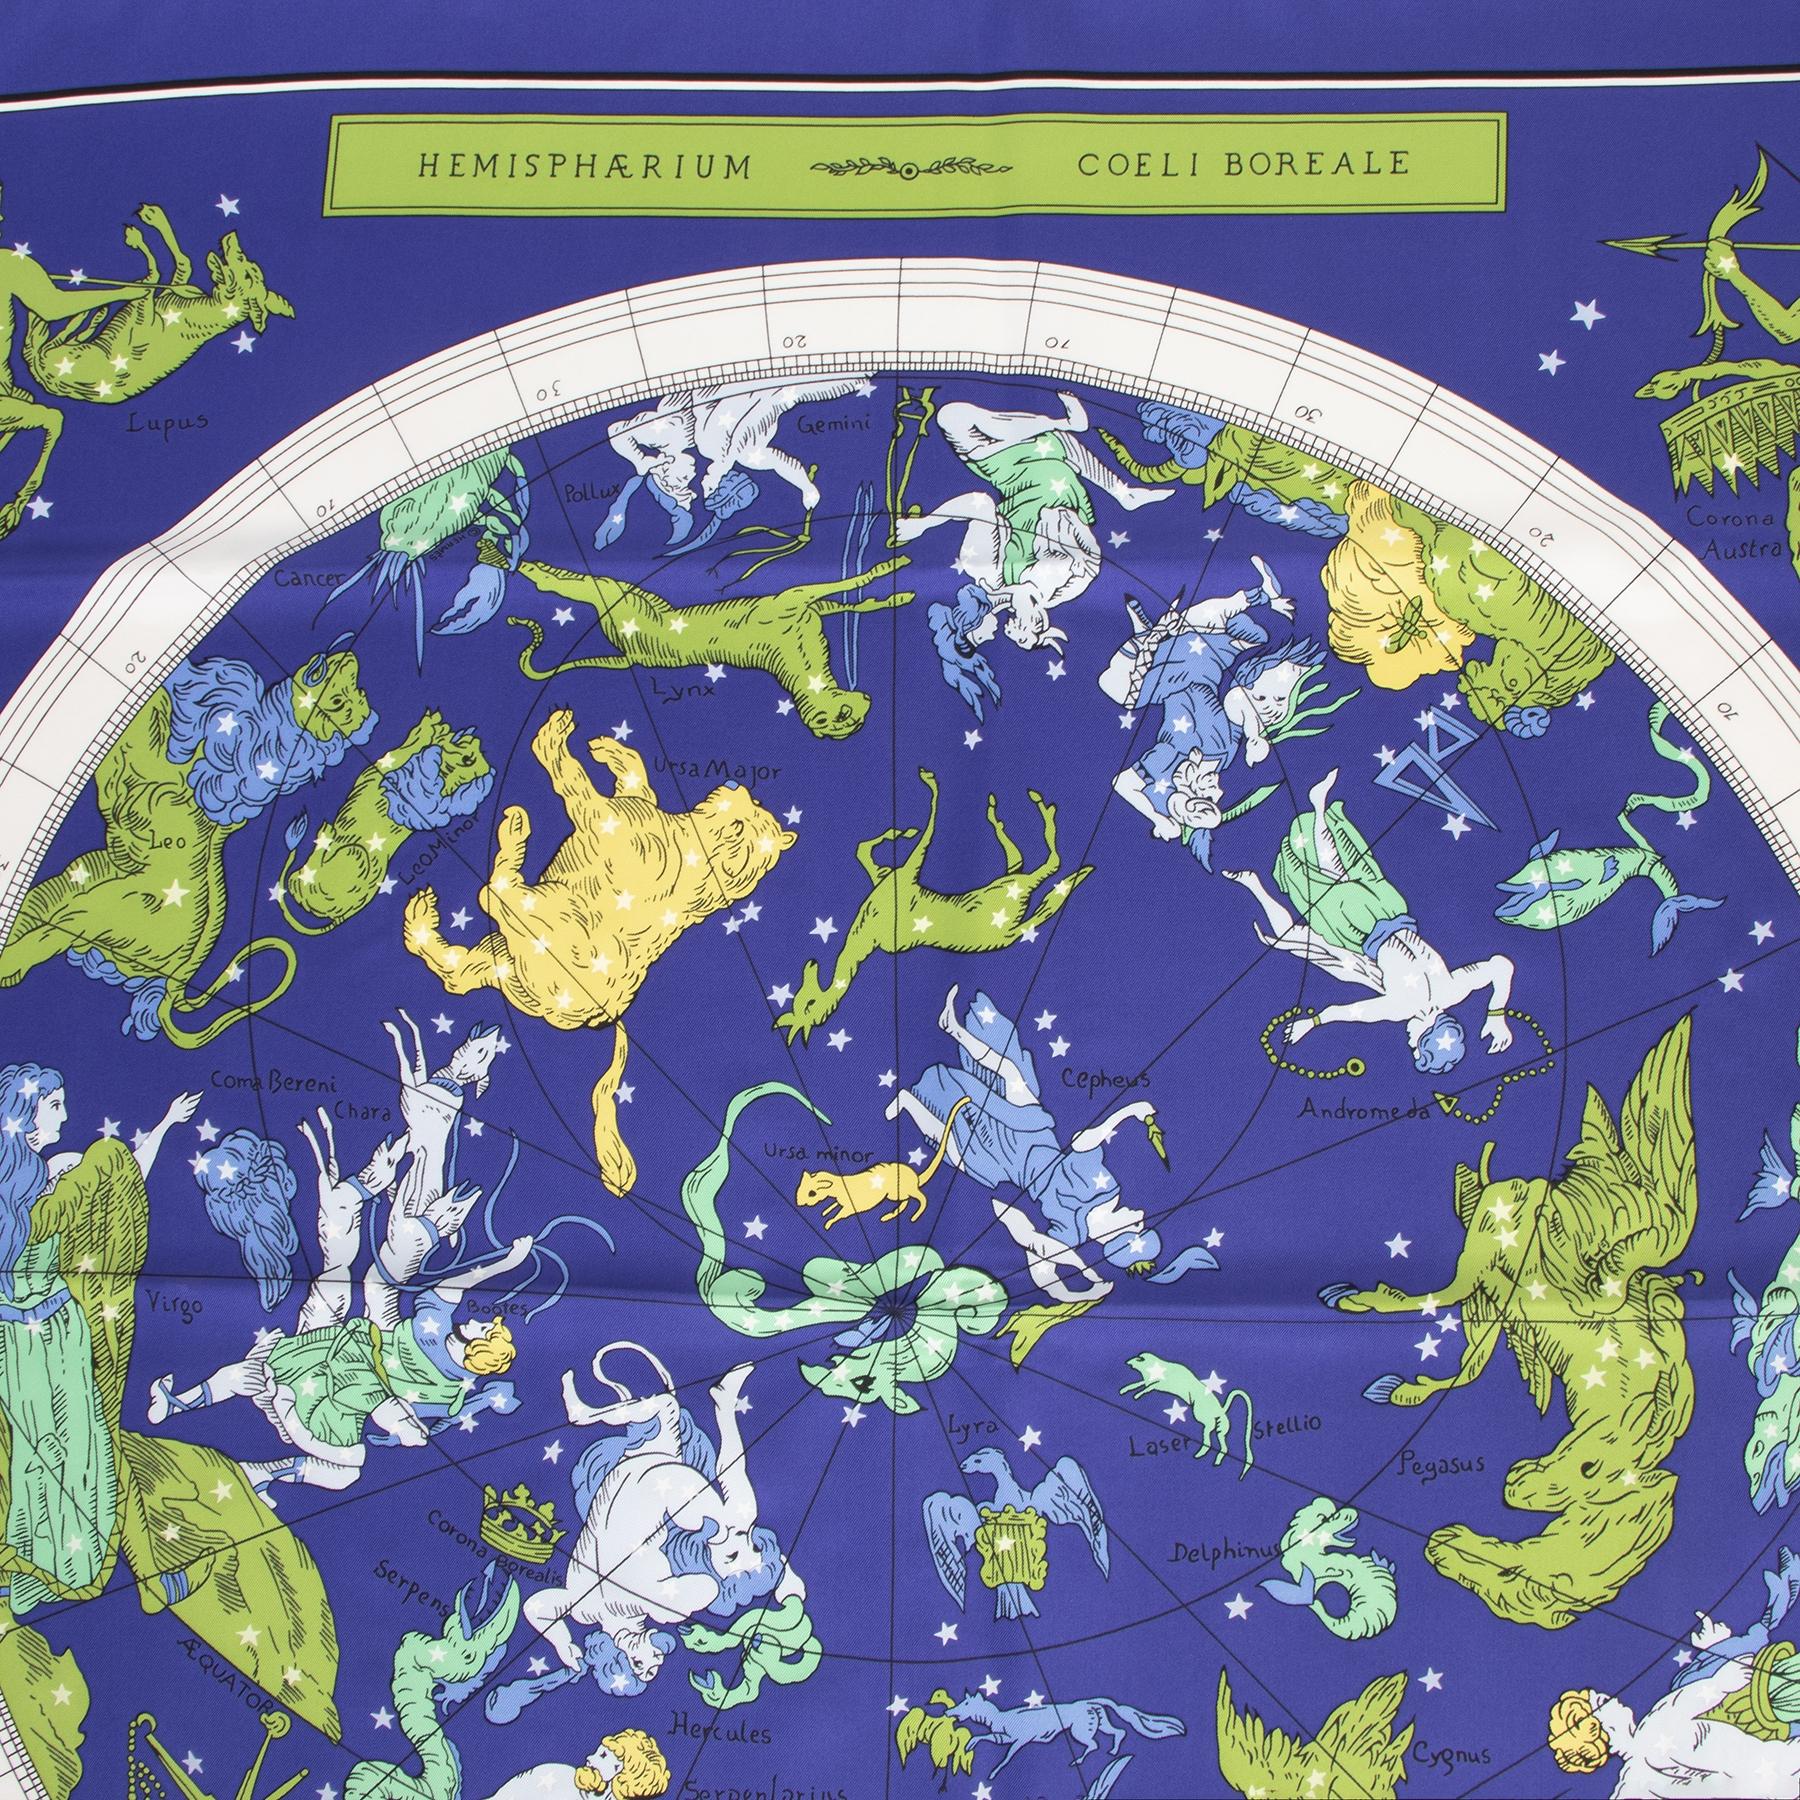 Very good condition

Hermès Cobalt Green Zodiac Hemisphaerium Coeli Boreale 2009 Scarf

This Hermès Zodiac Hemisphaerium Coeli Boreale was designed by Hugo Grygkar in 2009. This luxury scarf comes in 100% silk and features vibrant blue cobalt and